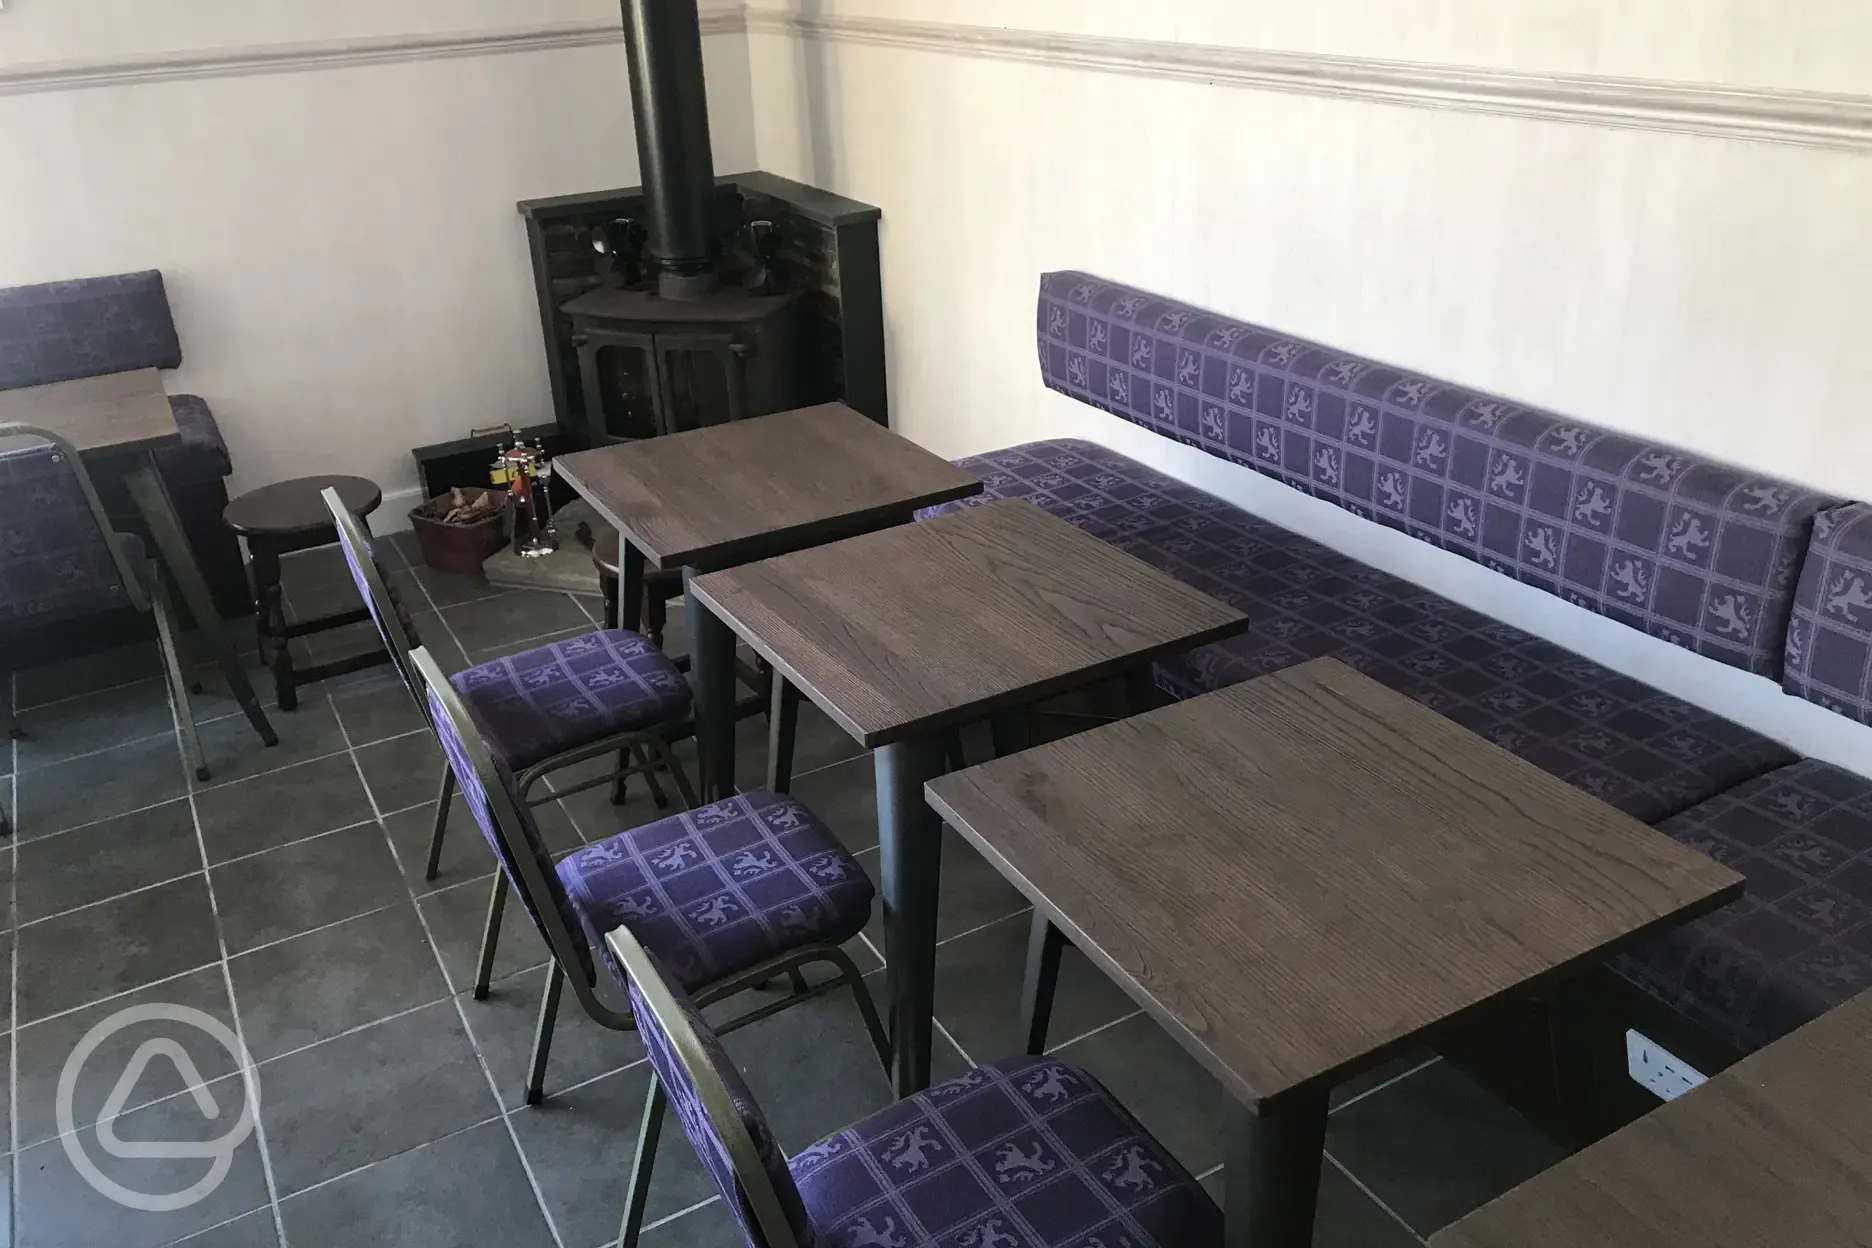 Cafe indoor seating area and woodburner